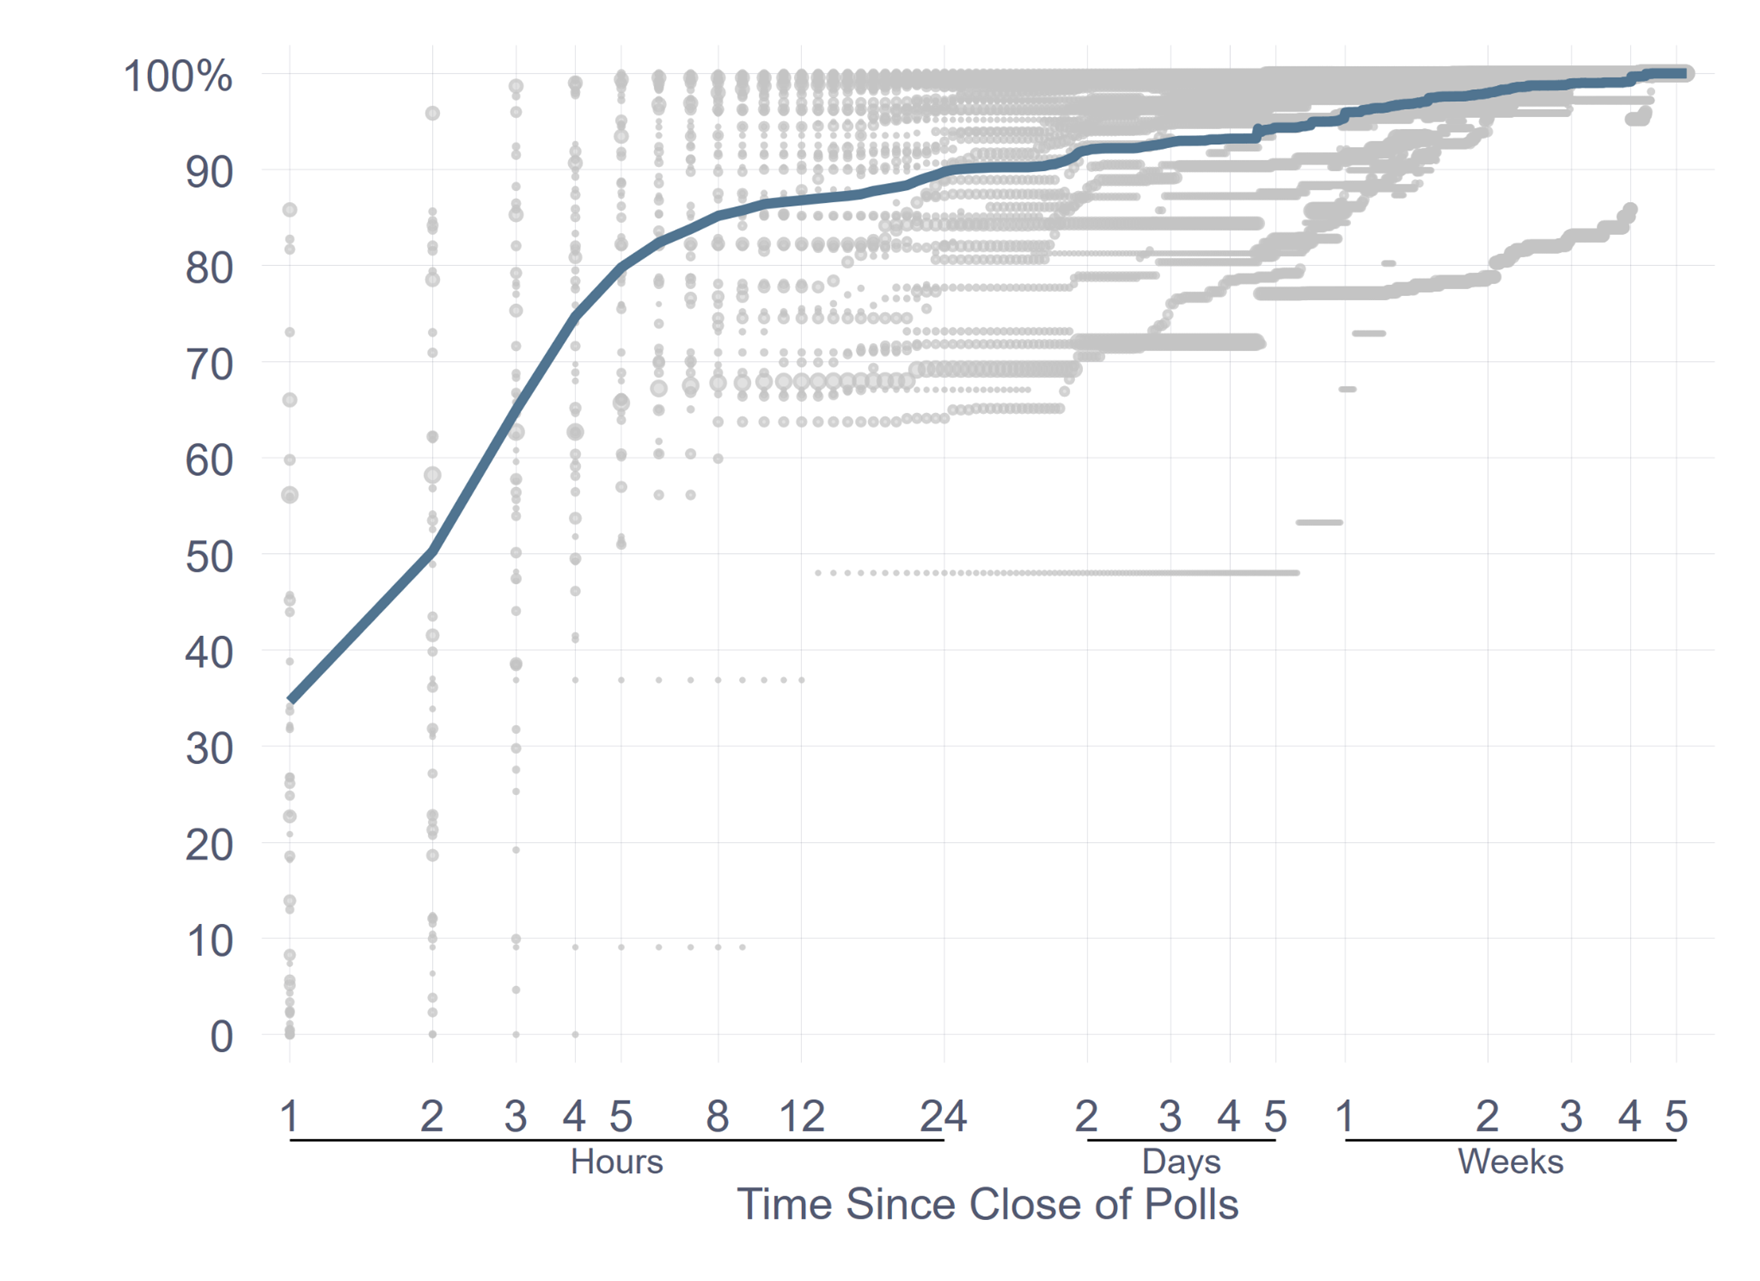 A chart shows the percentage of votes counted, from 0 to 100, along the y-axis, mapped against the time since close of polls along the x-axis. The x-axis measures time in 1-24 hours, then 2-5 days, and then 1-5 weeks.